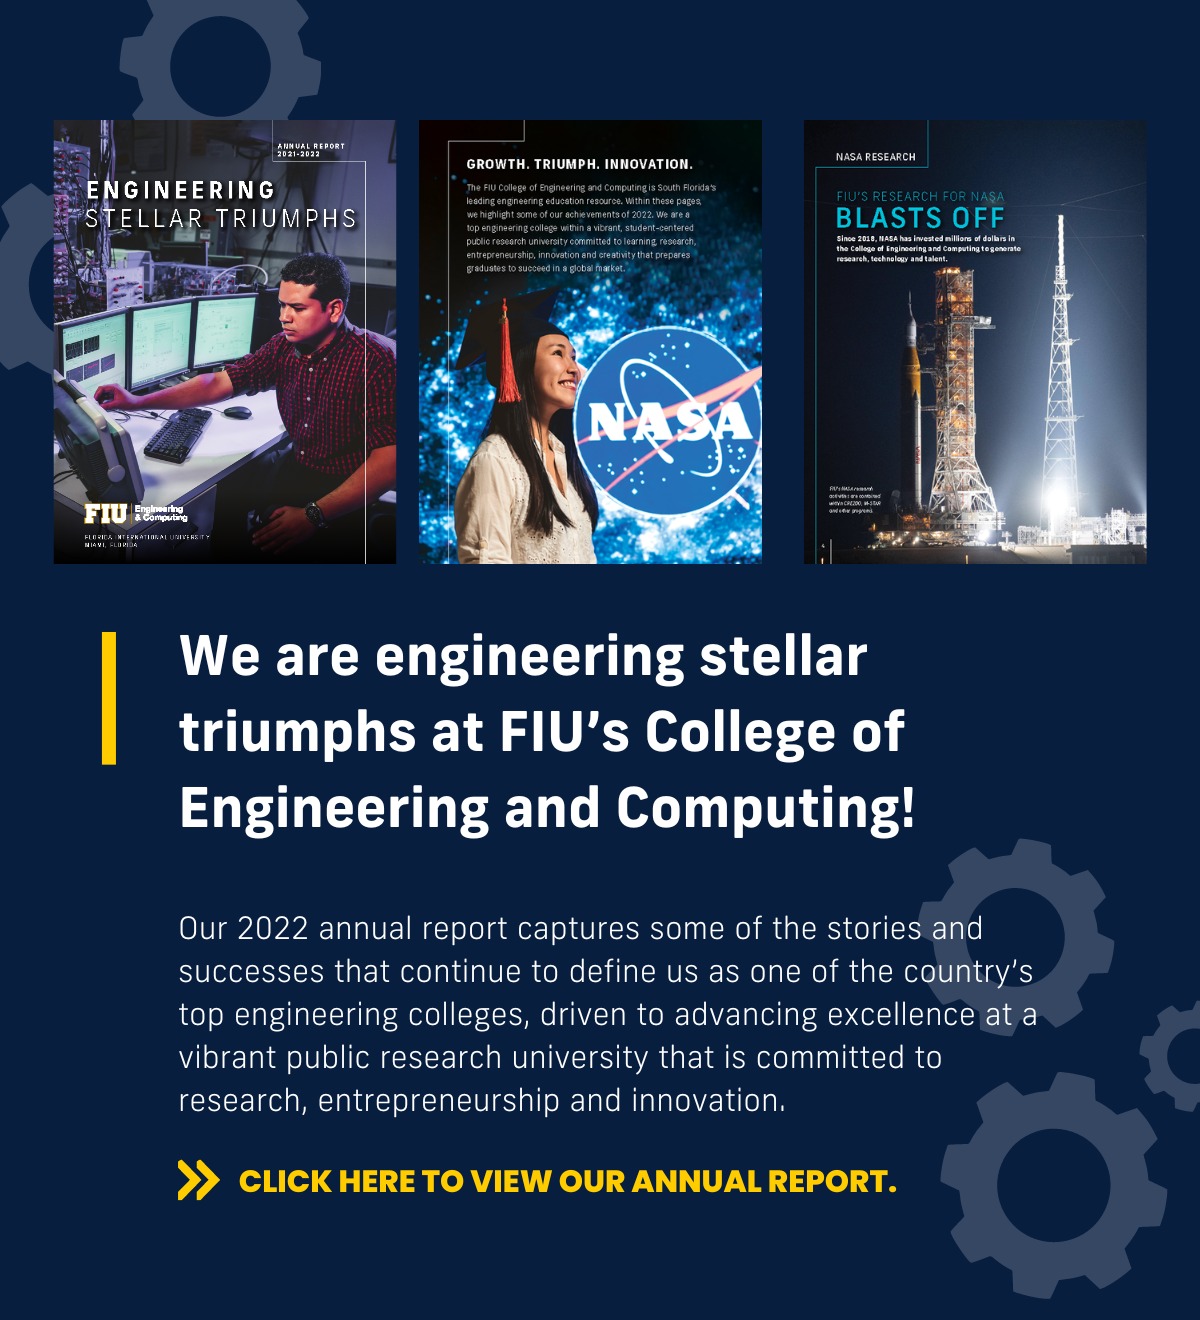 ESRL featured in FIU College of Engineering and Computing annual Report 2021-2022